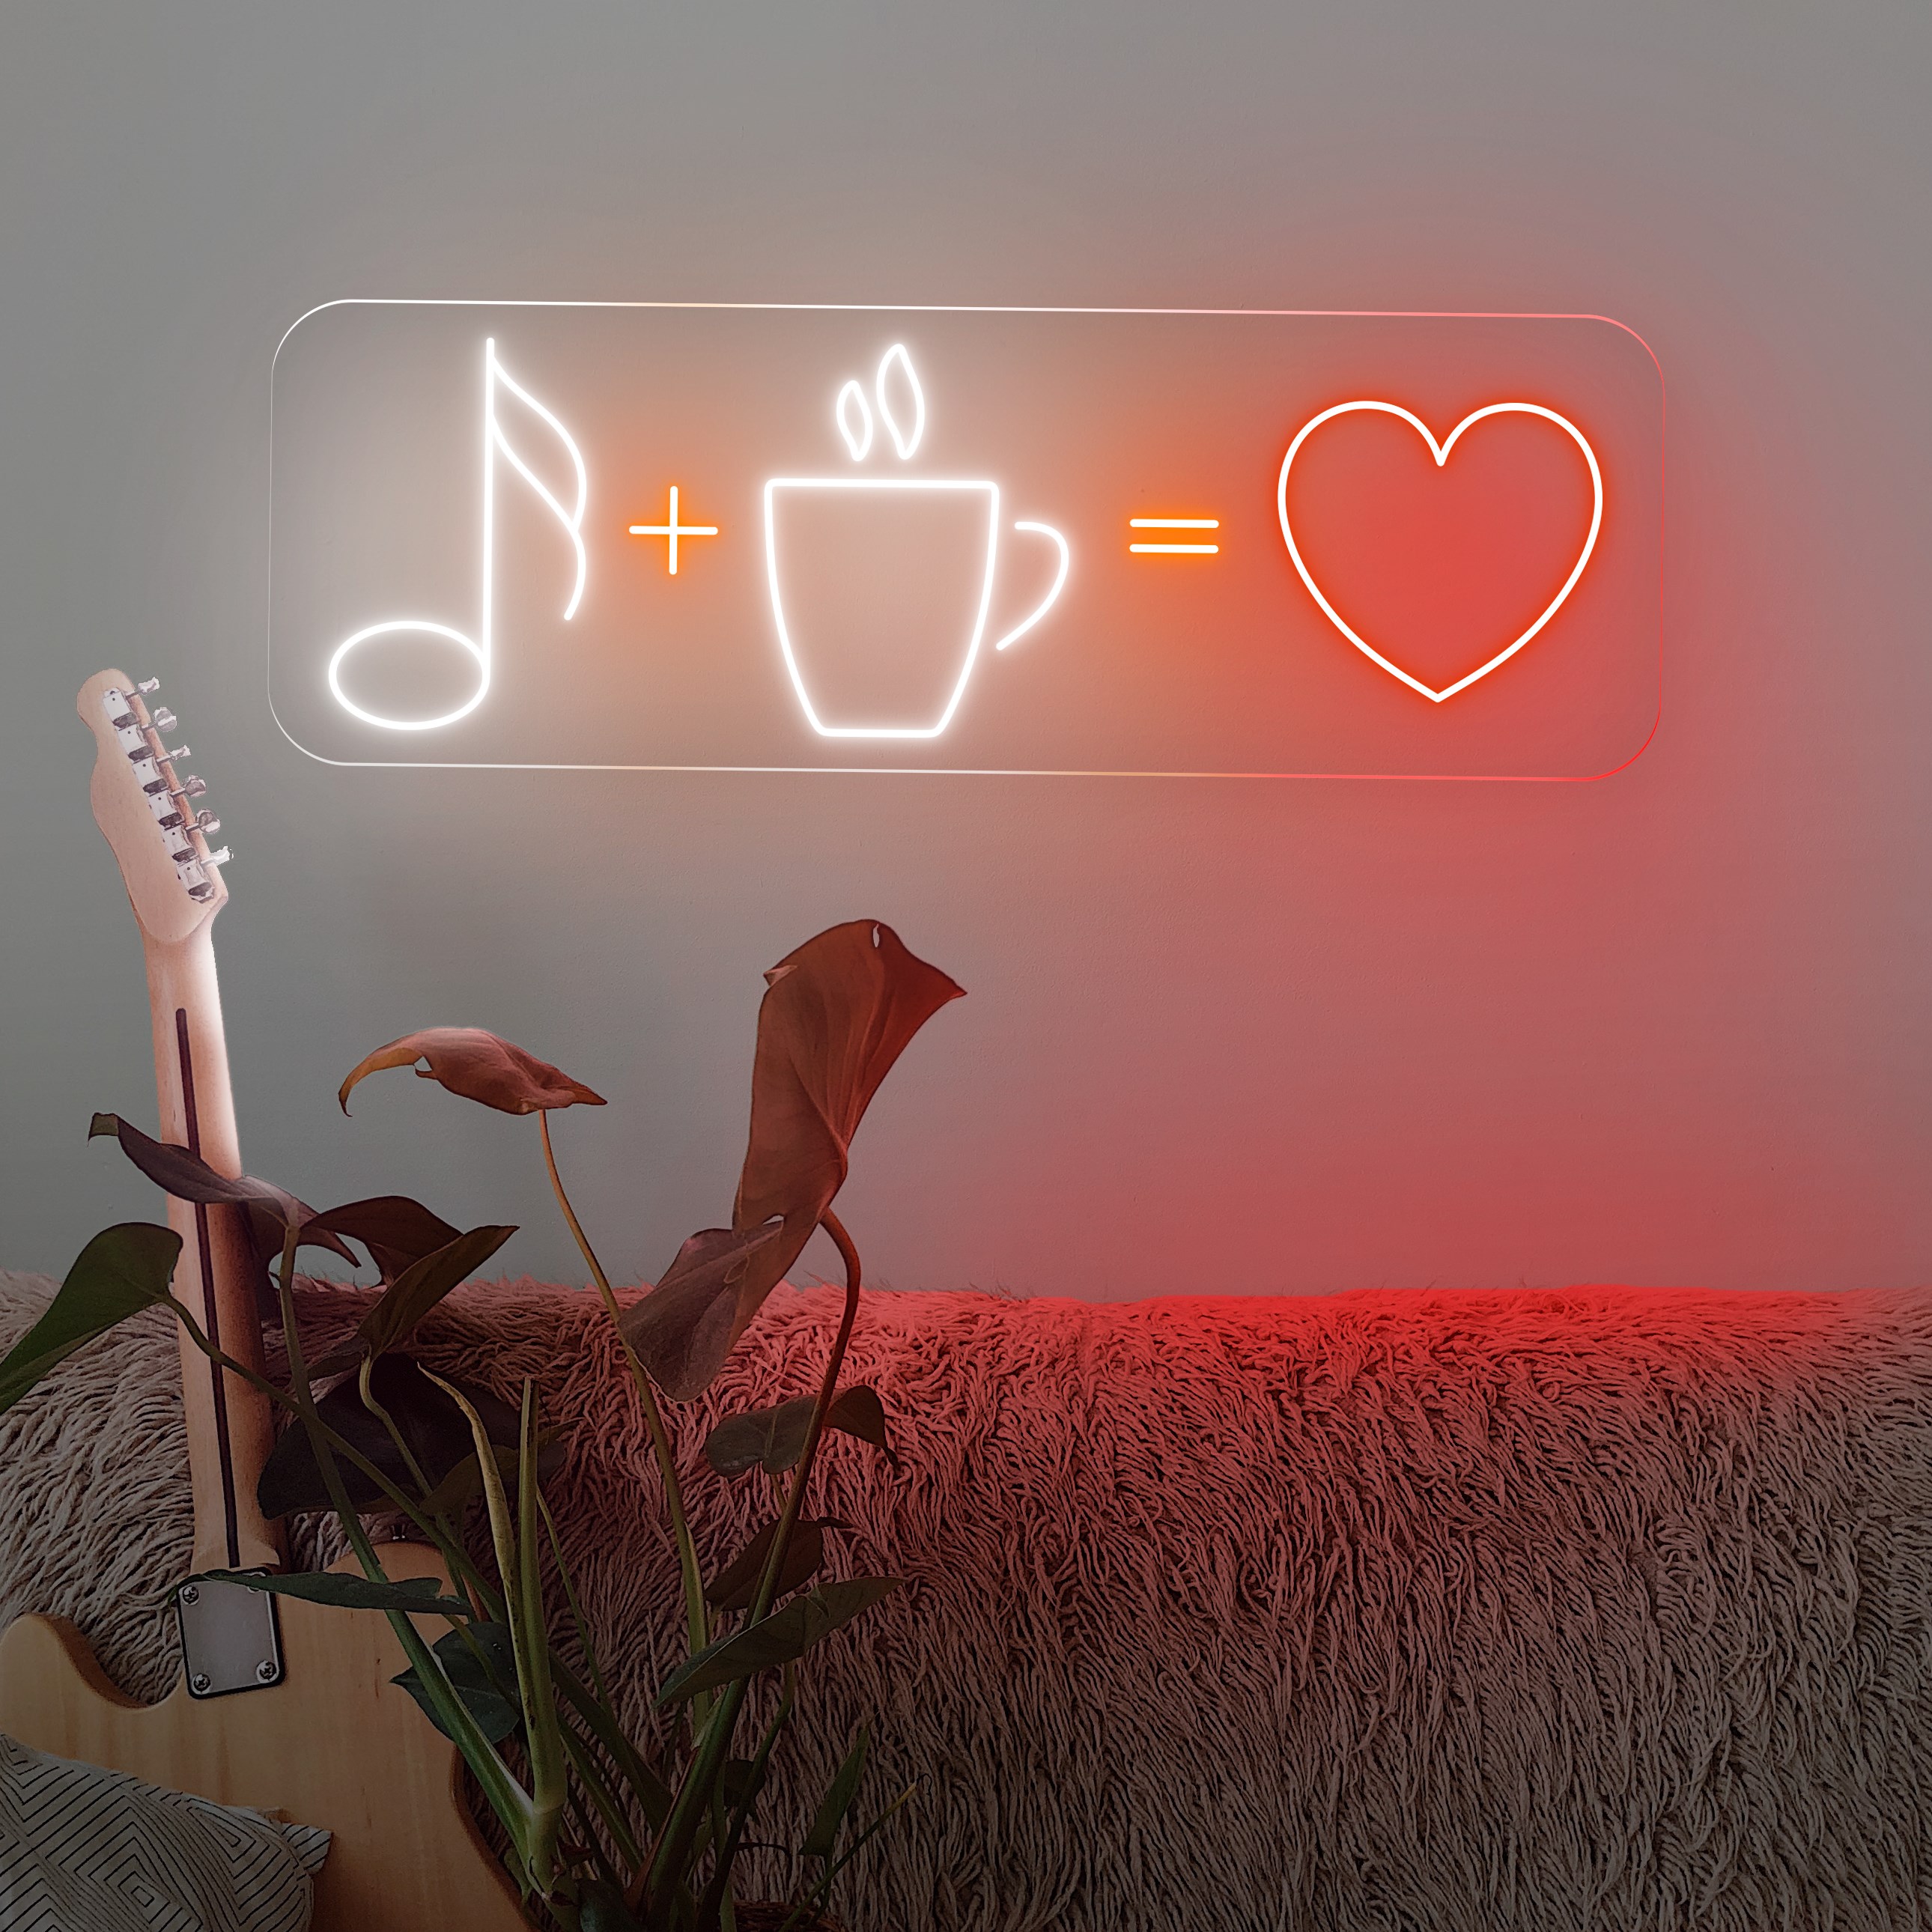 Picture of "Coffee + Music = Love" Neon Sign